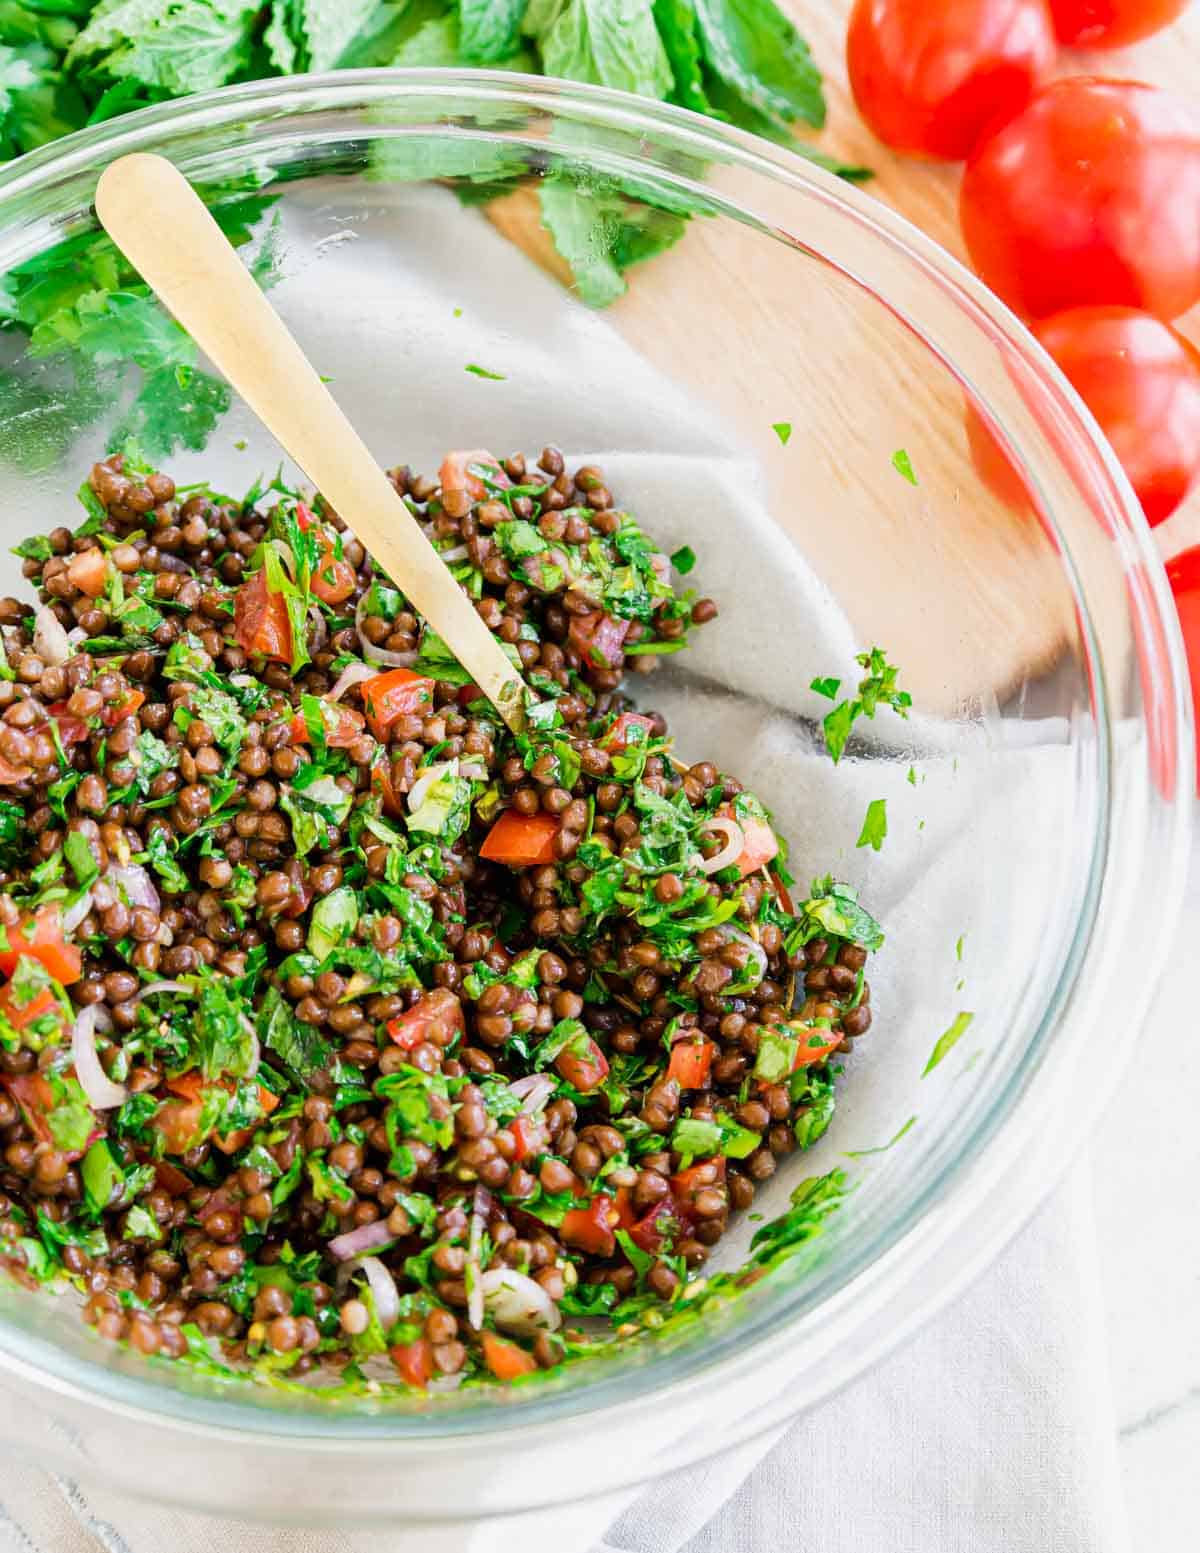 Mixing lentil tabbouleh together in a glass bowl with a spoon.